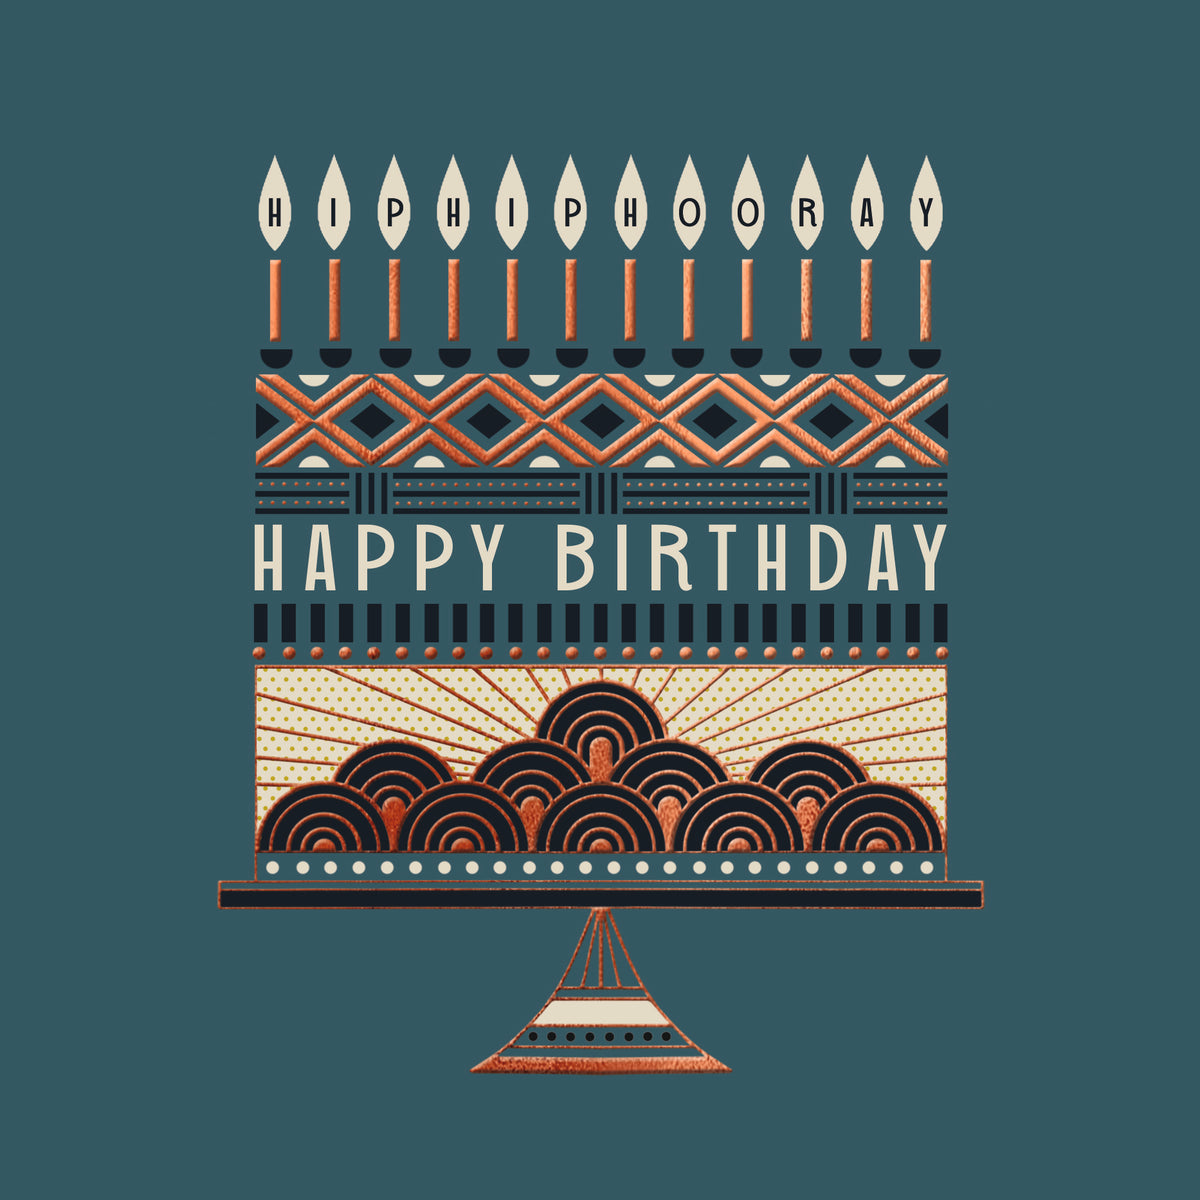 Copper Deco Birthday Cake Card from Penny Black